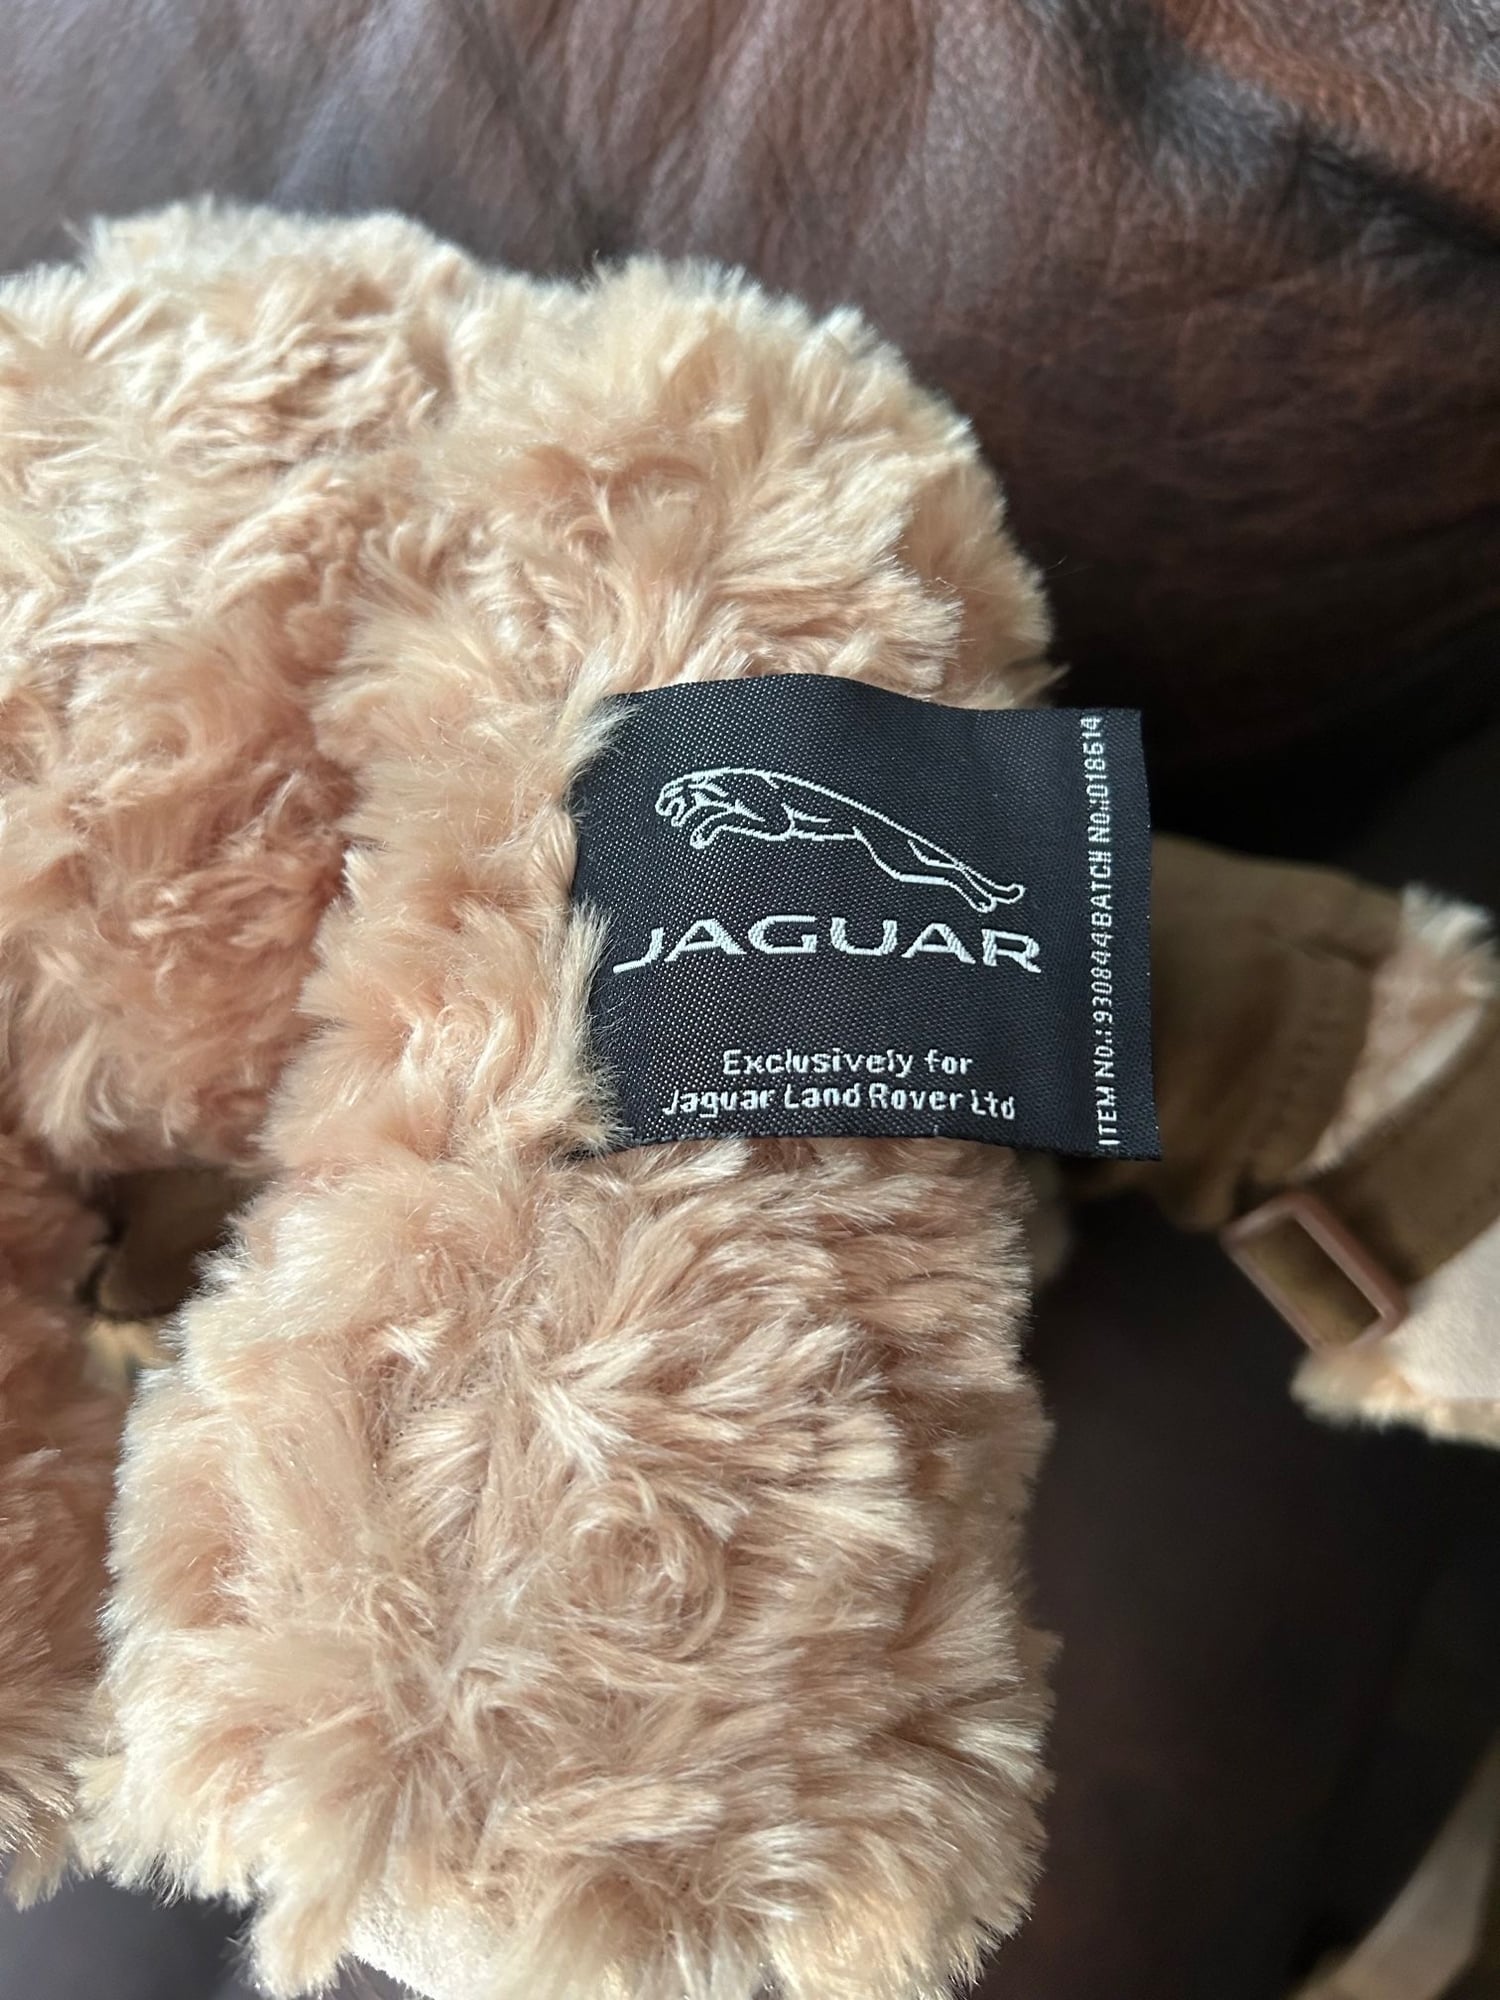 Miscellaneous - Jaguar Heritage Plush Bear - perfect Condition w/ Tags - New - 0  All Models - South Windsor, CT 06074, United States